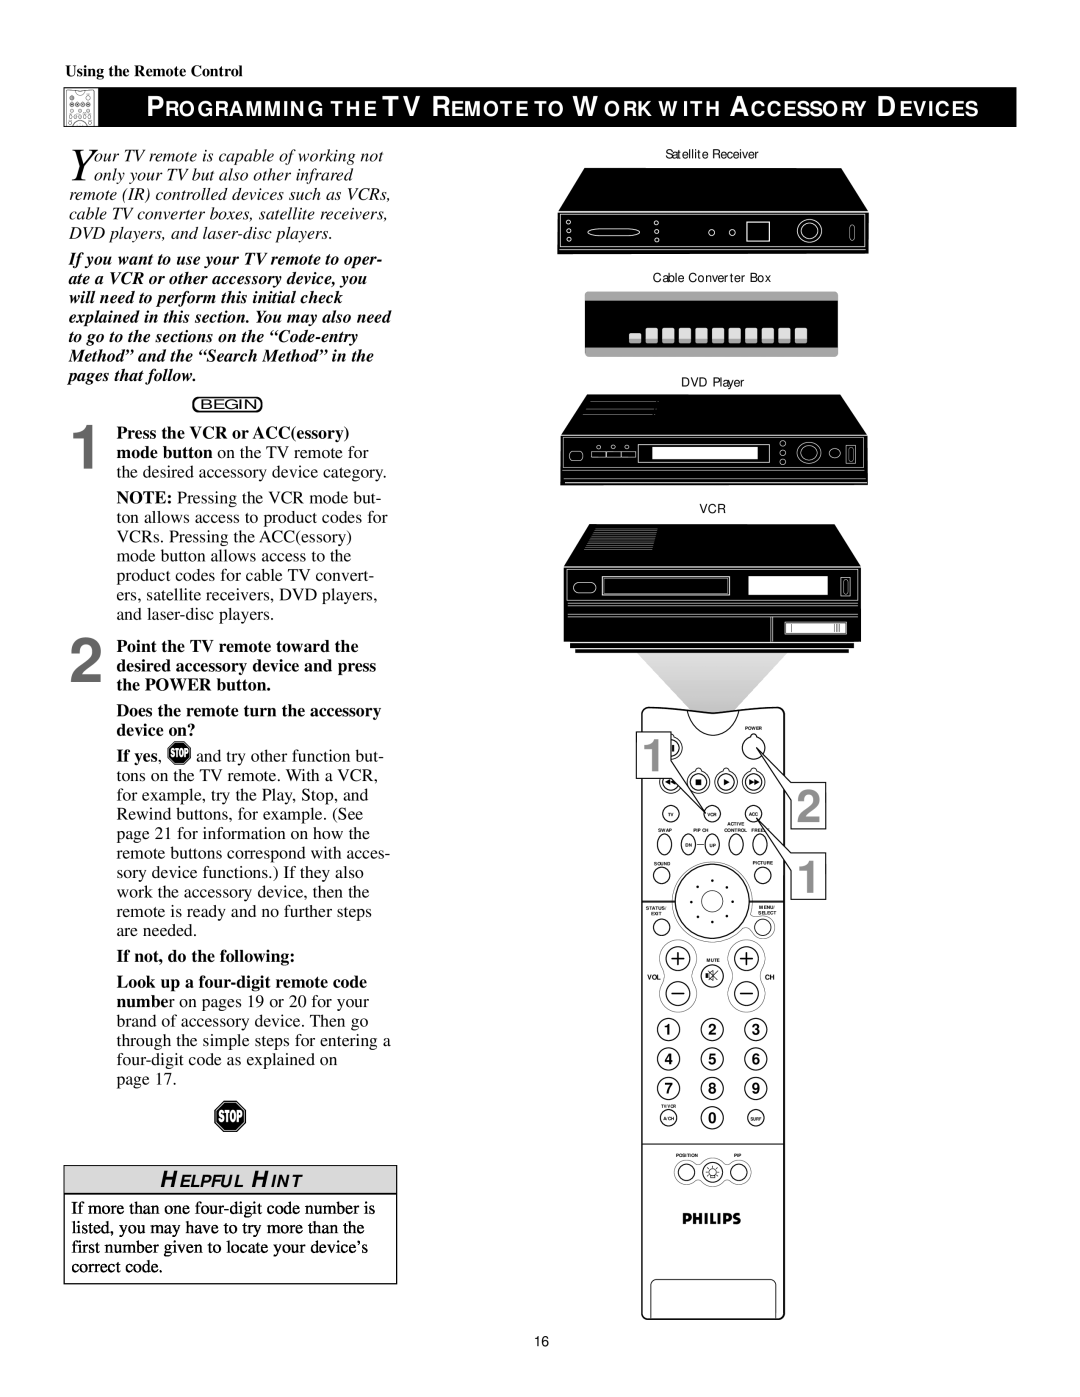 Philips 60PP9202, 50PP 9202, 43PP9202 manual Programming The Tv Remote To Work With Accessory Devices, Helpful Hint 